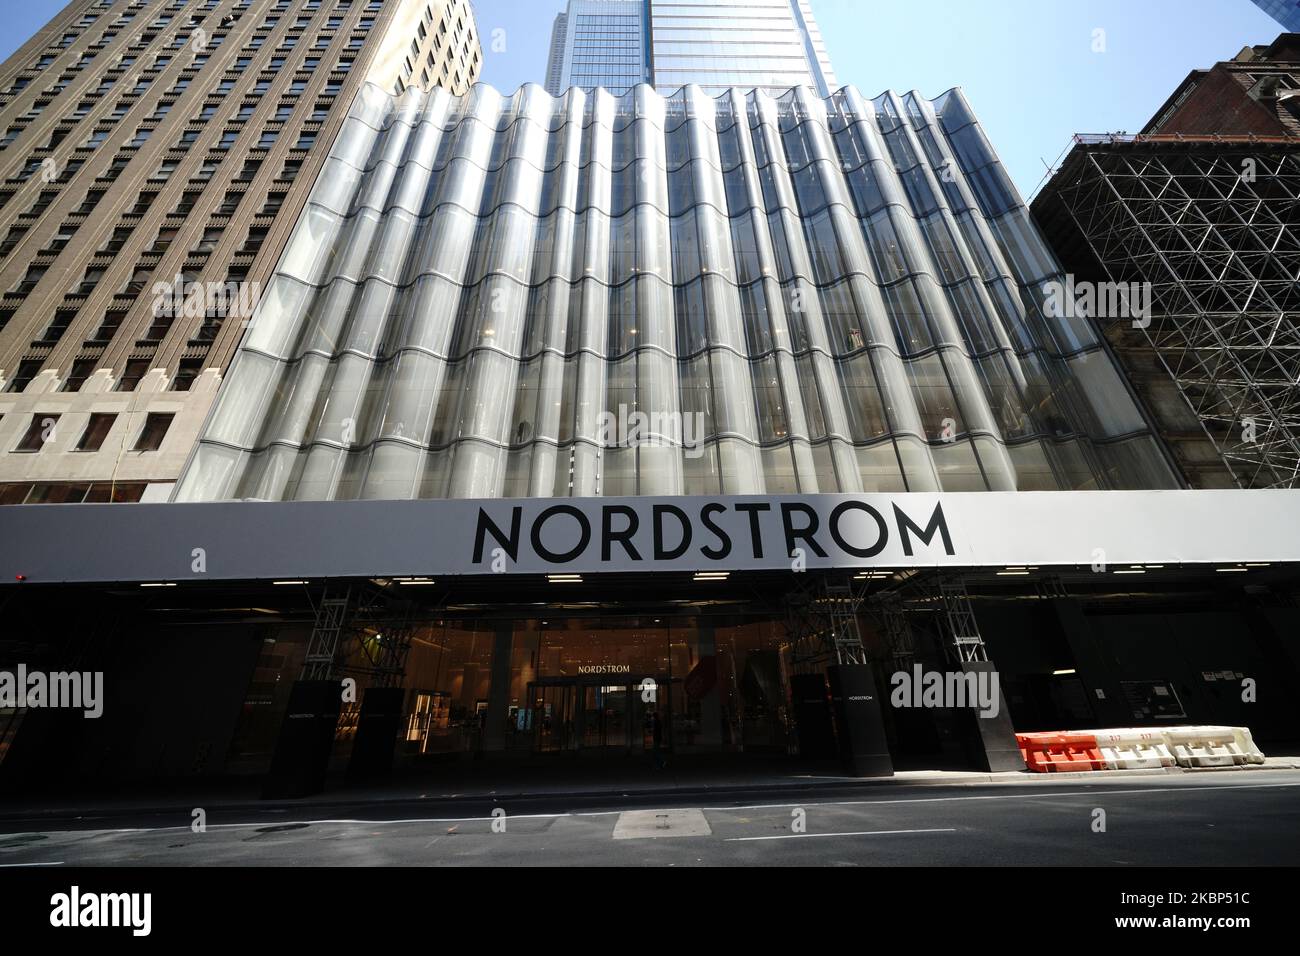 A view of Nordstrom Store during the coronavirus pandemic on May 20, 2020 in New York City. COVID-19 has spread to most countries around the world, claiming over 316,000 lives with over 4.8 million infections reported. (Photo by John Nacion/NurPhoto) Stock Photo